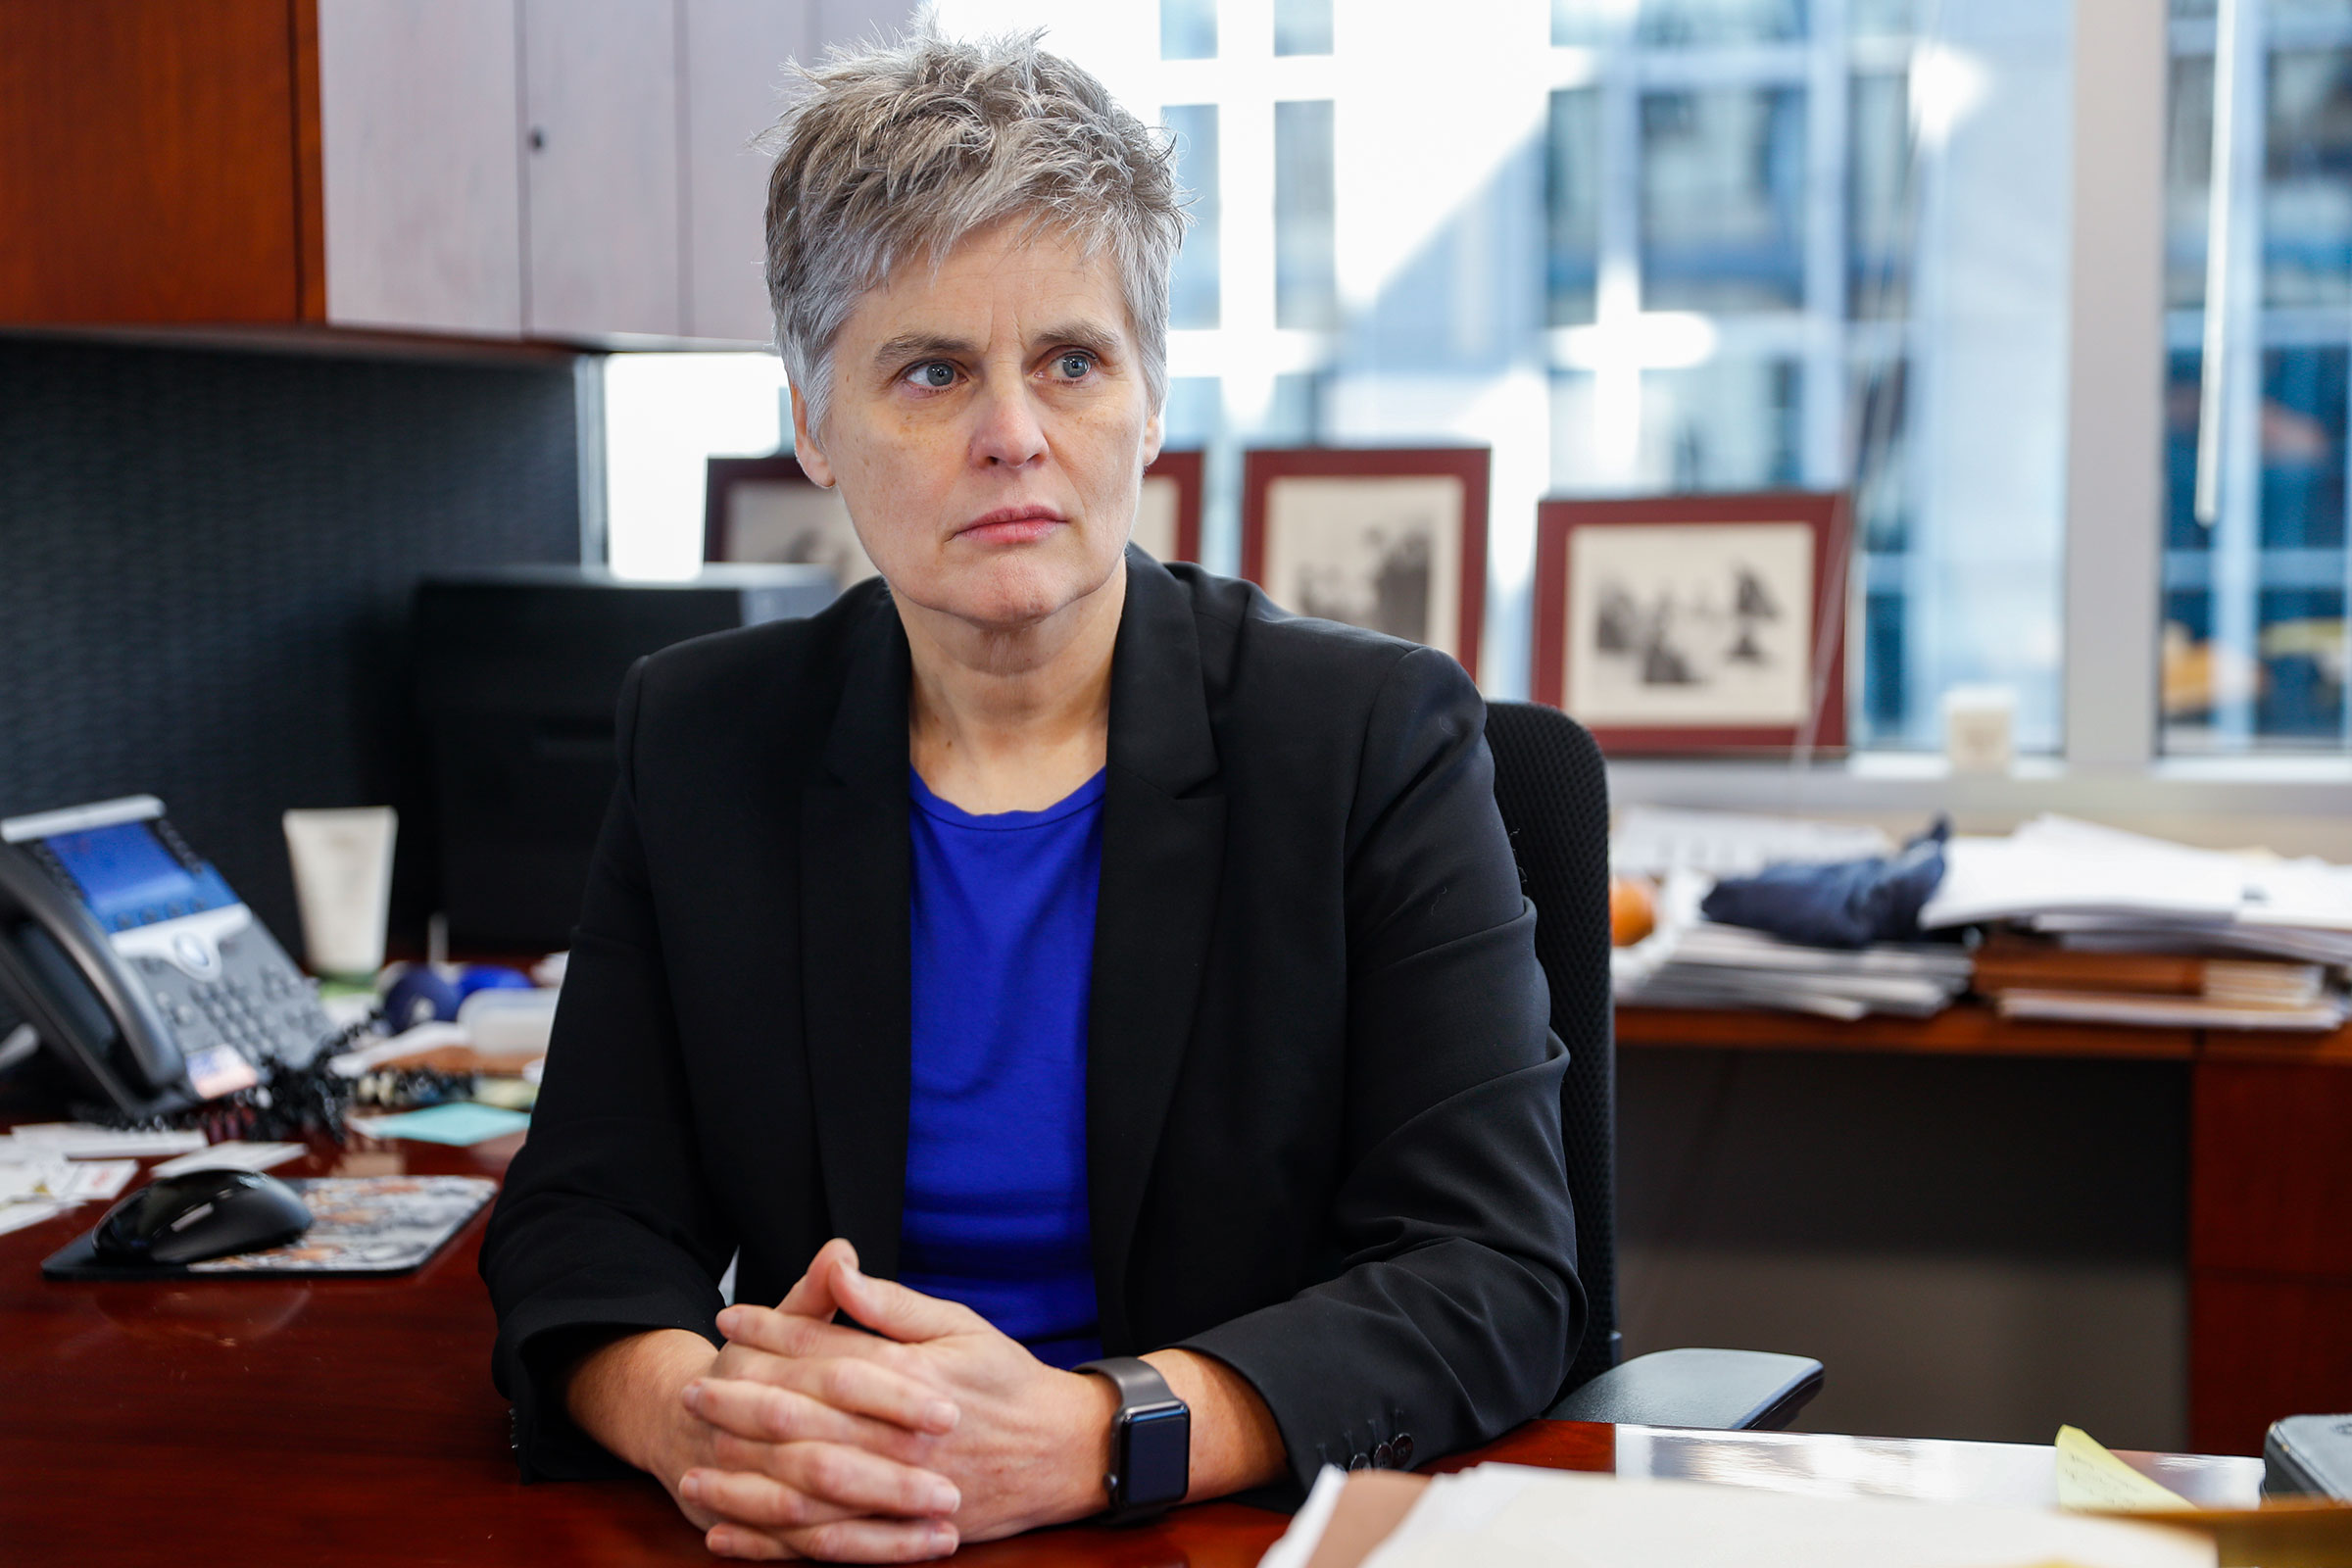 Mary Moriarty at her chief public defender's offices in Minneapolis, on Oct. 25, 2019. (John Minchillo—AP)